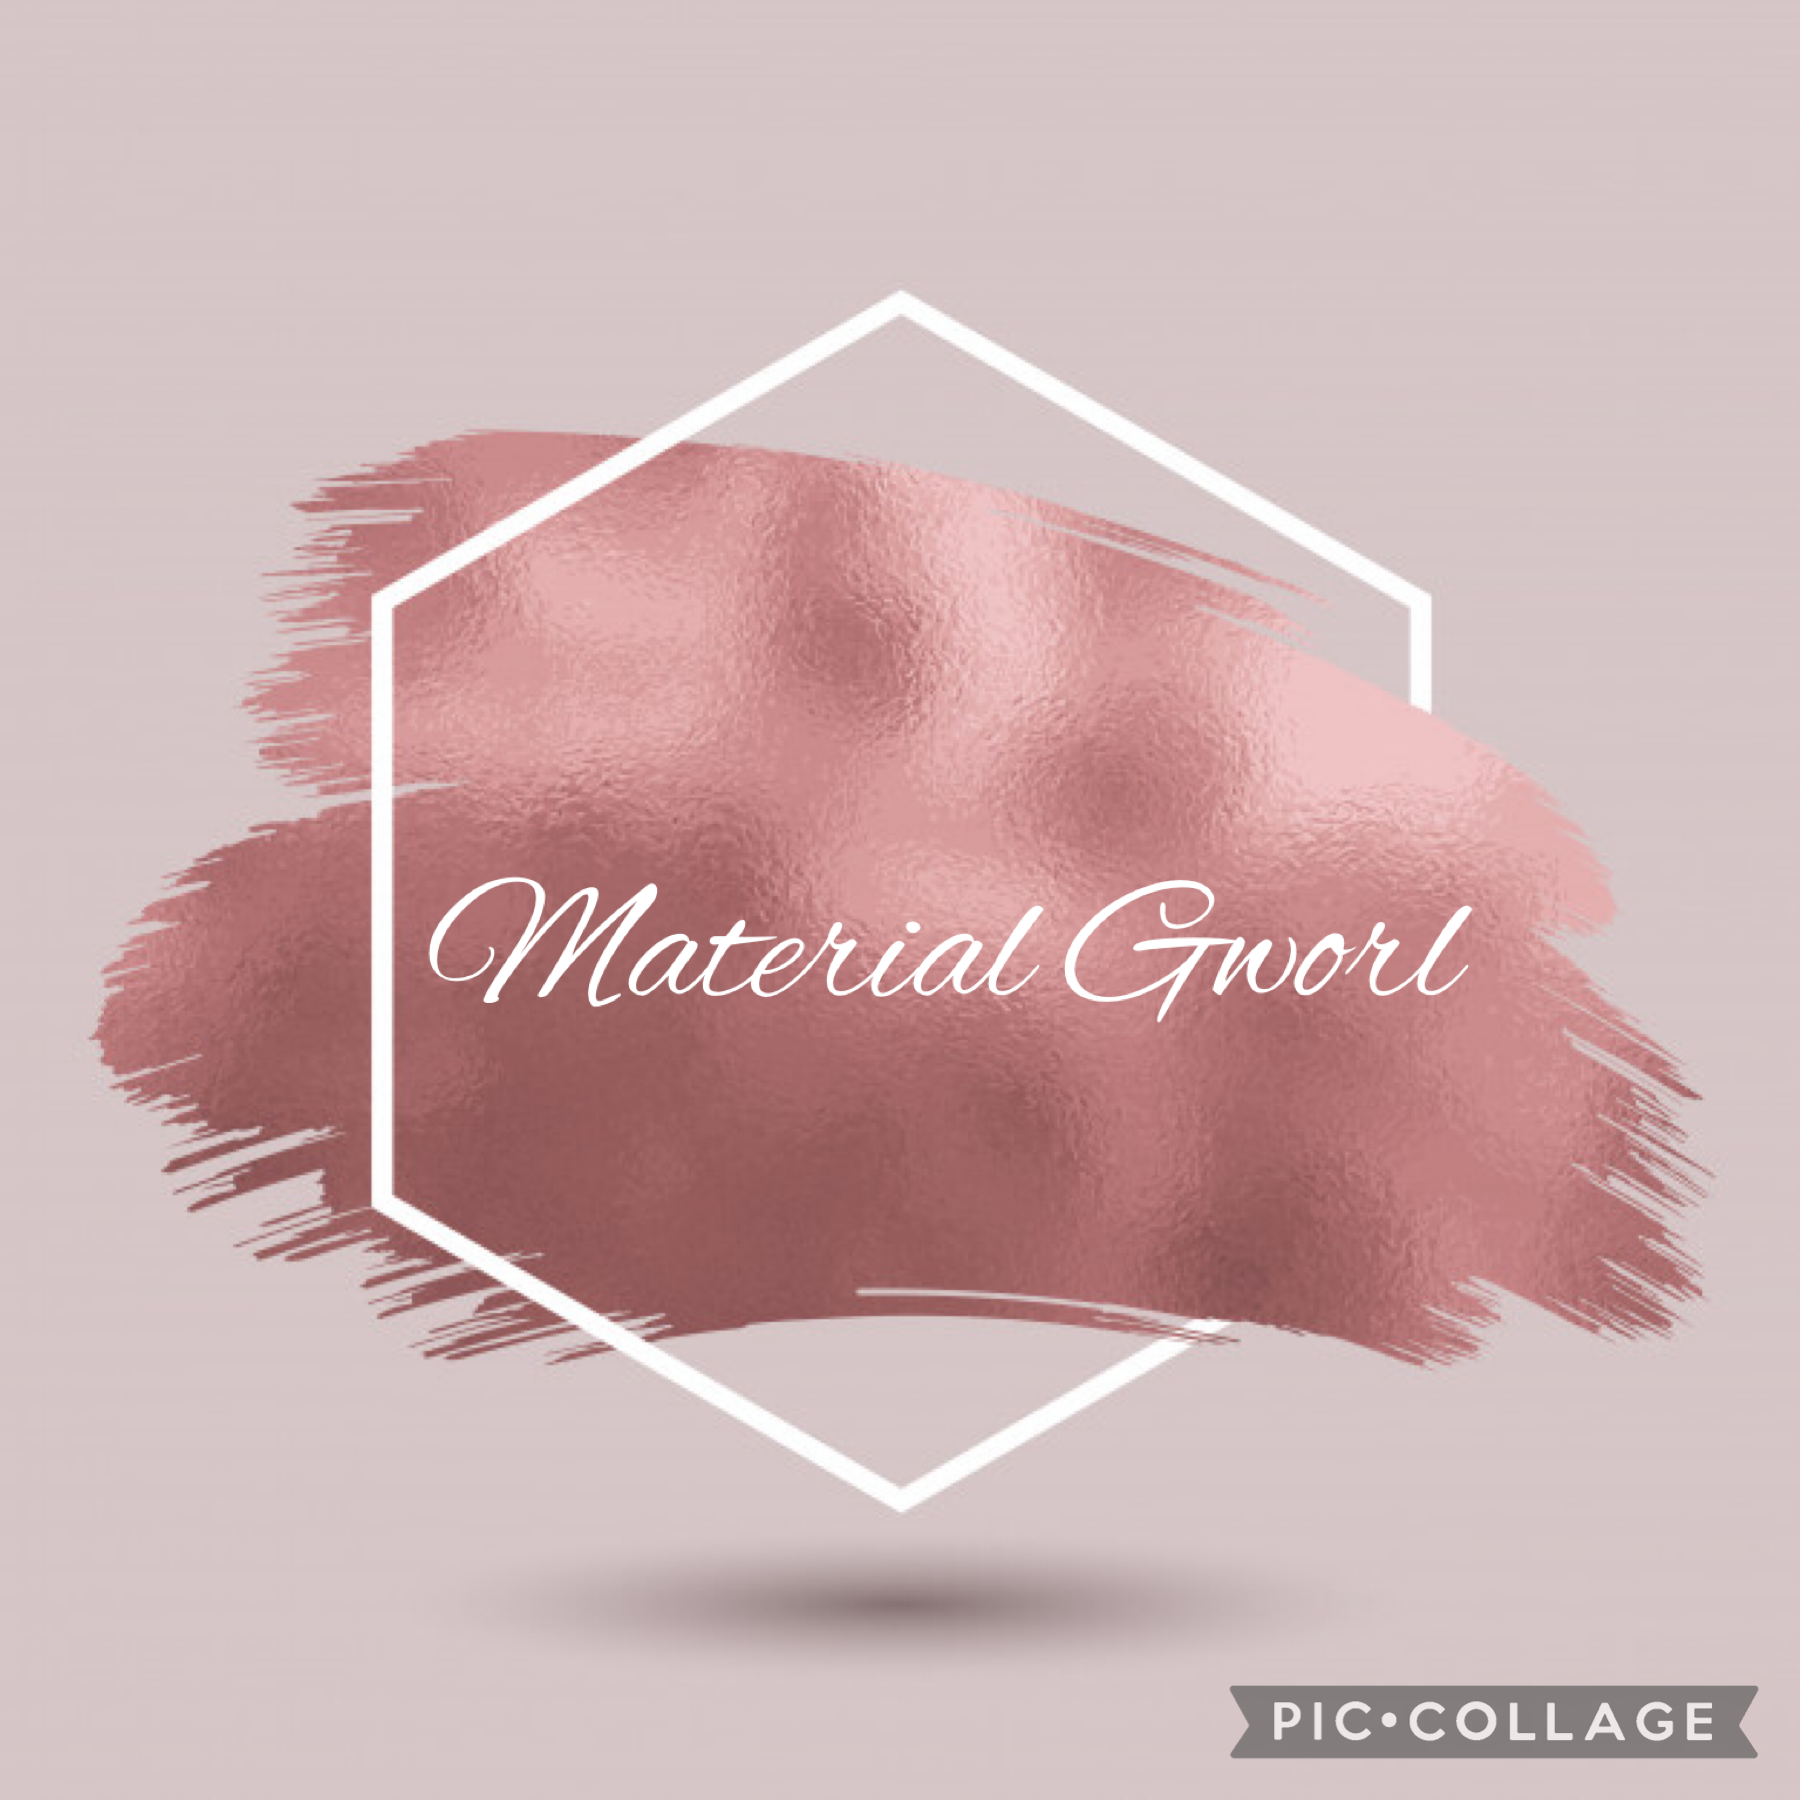 Comment if ur a material gworl